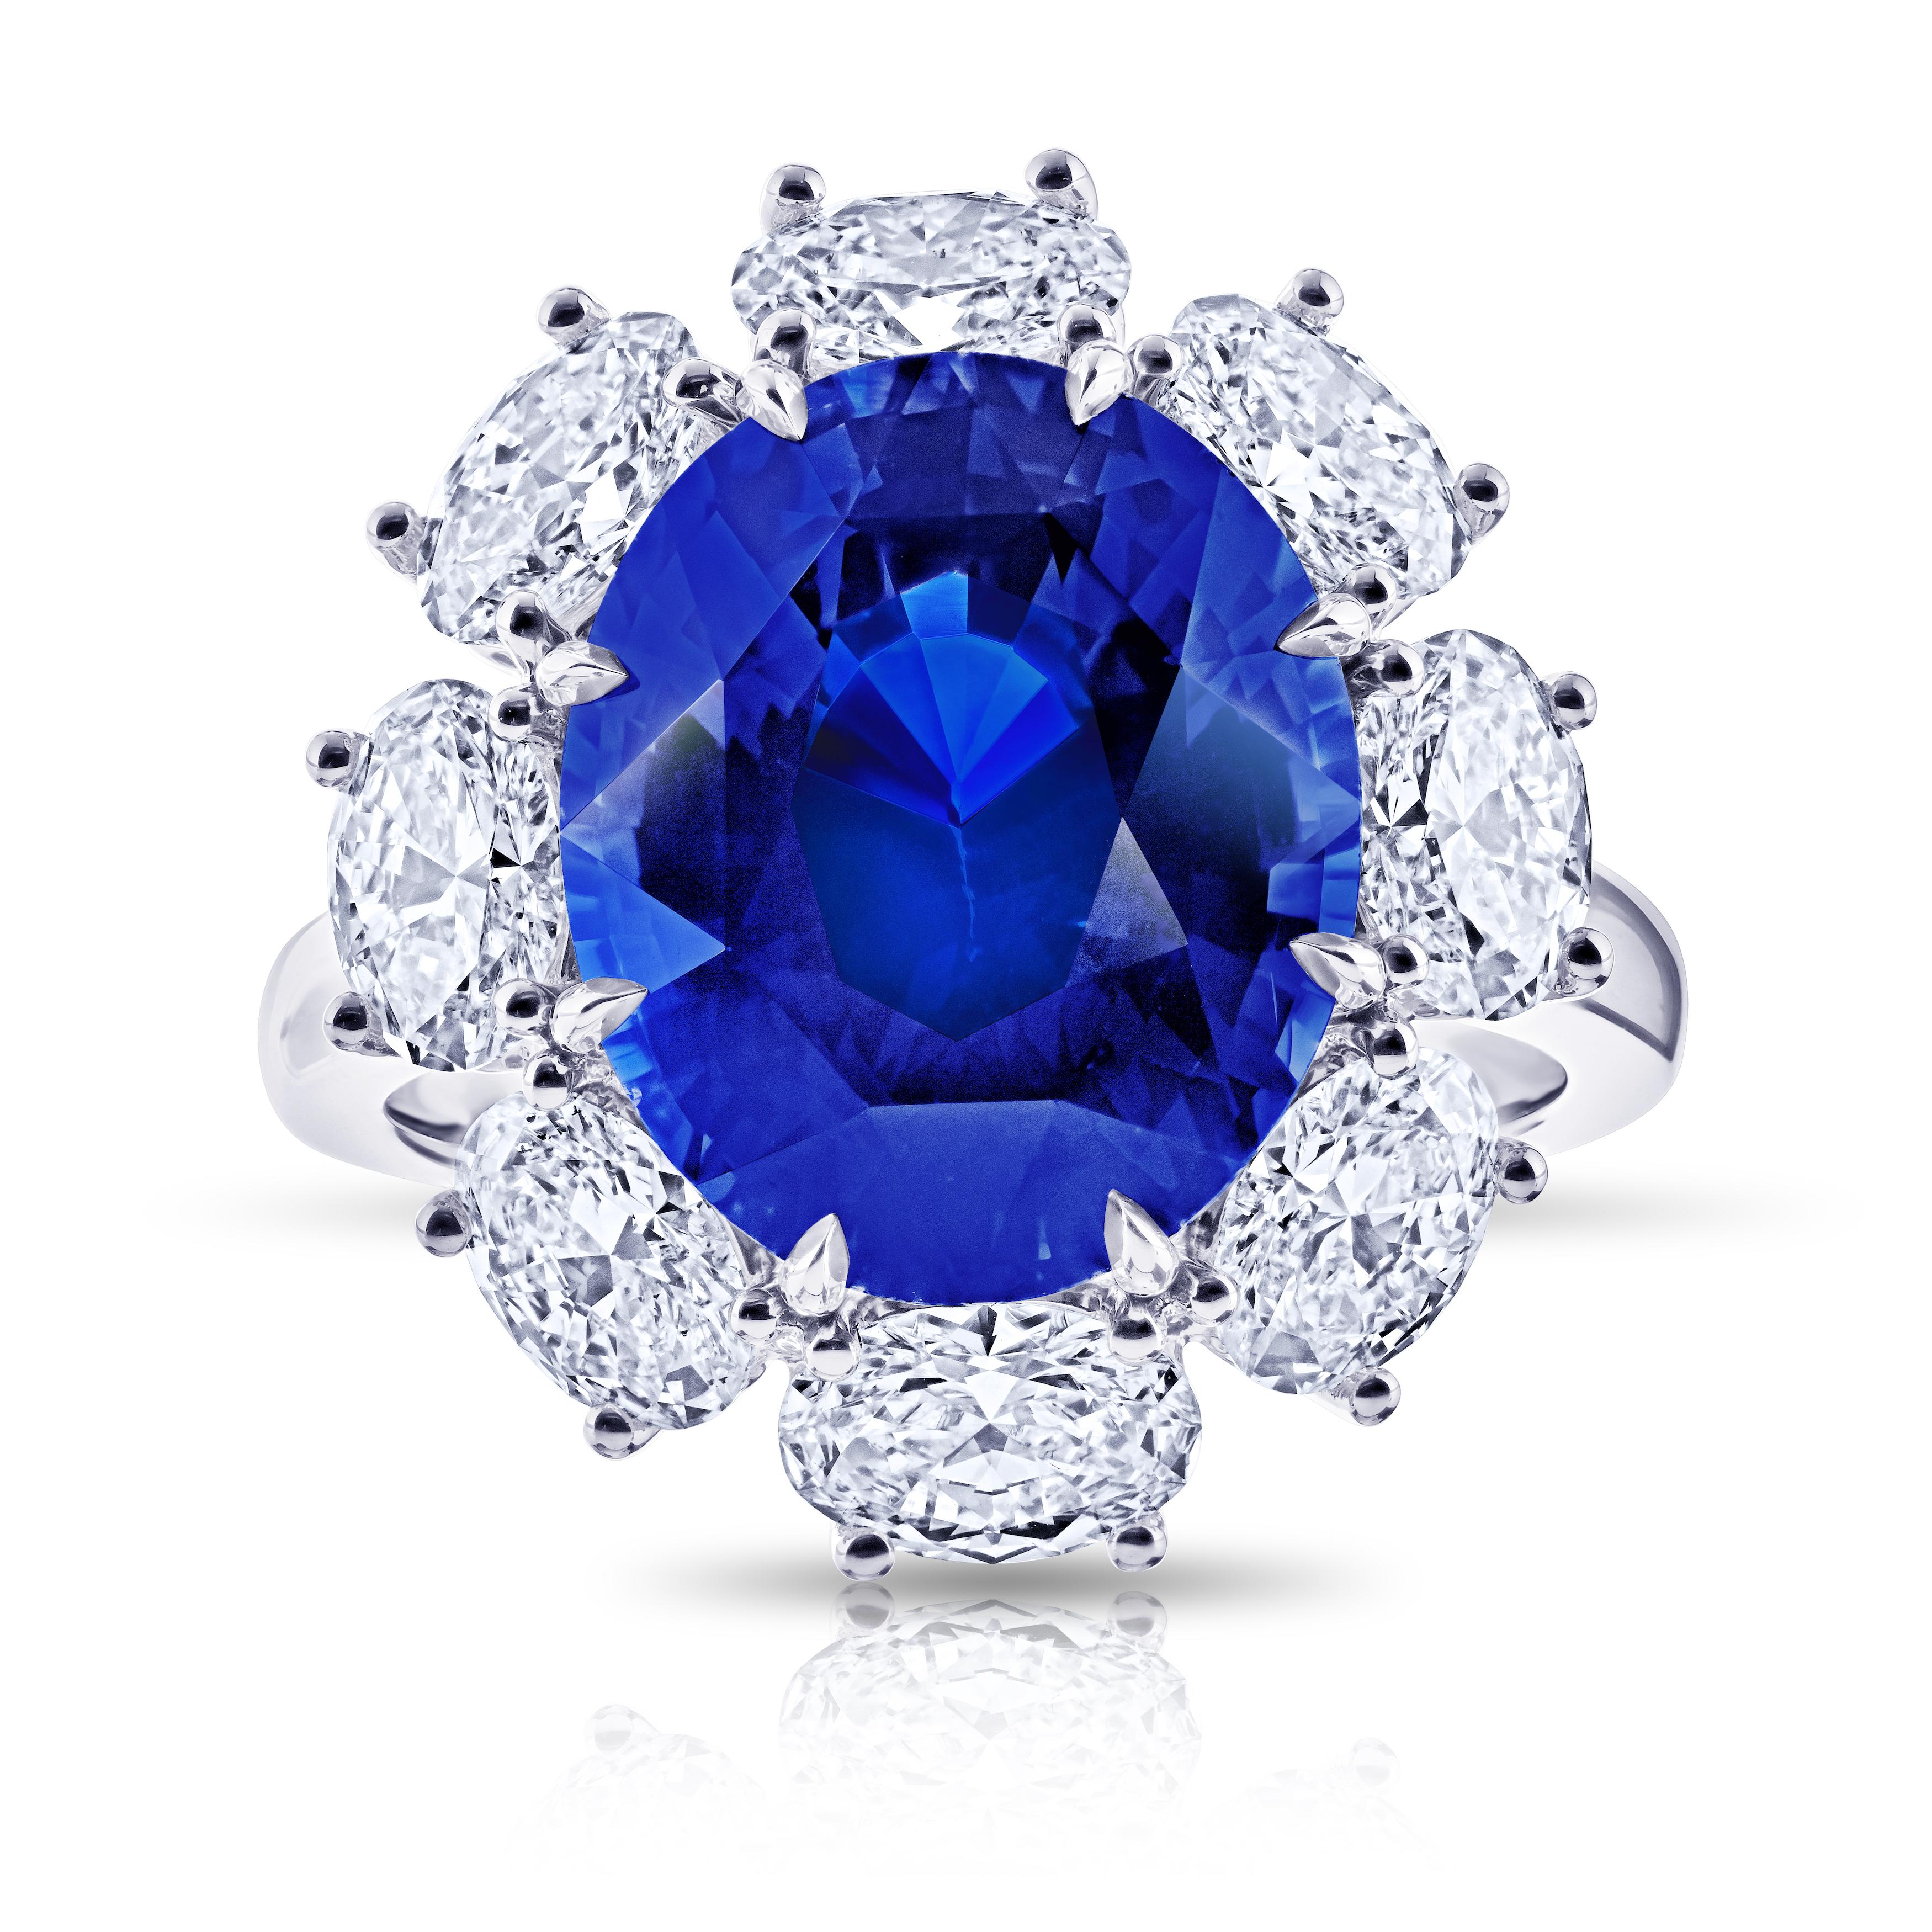 Oval Cut 8.37 Carat Oval Blue Sapphire and Platinum Diamond Ring For Sale